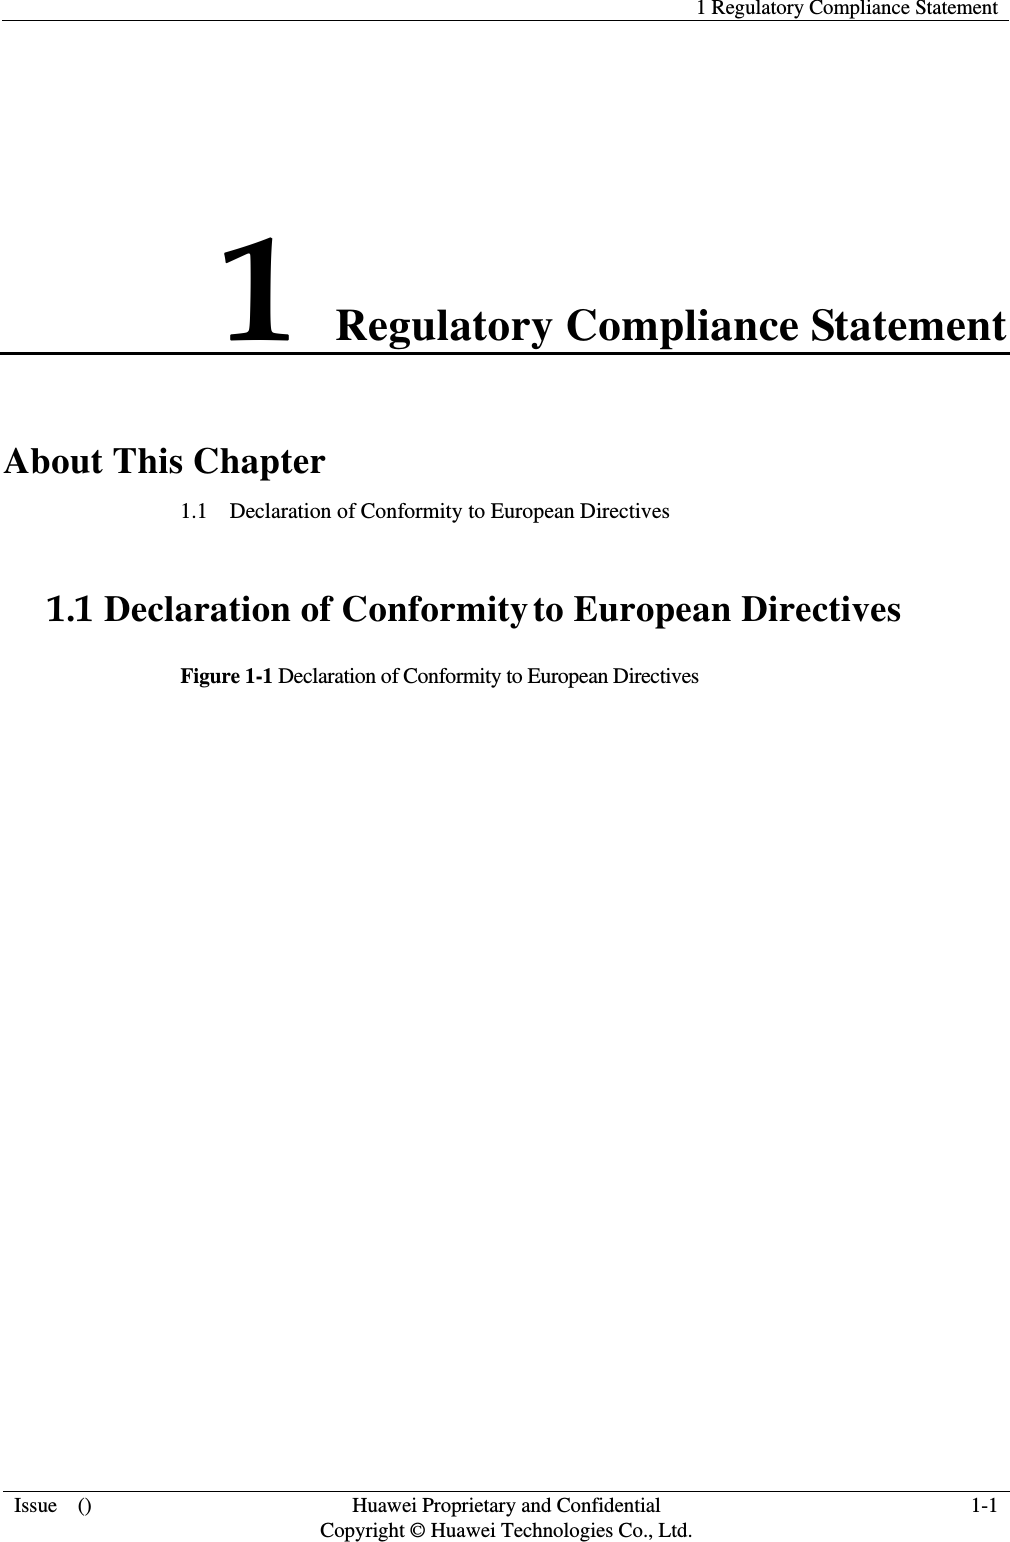   1 Regulatory Compliance Statement Issue  ()  Huawei Proprietary and Confidential     Copyright © Huawei Technologies Co., Ltd. 1-1 1 Regulatory Compliance Statement About This Chapter 1.1    Declaration of Conformity to European Directives 1.1 Declaration of Conformity to European Directives Figure 1-1 Declaration of Conformity to European Directives   